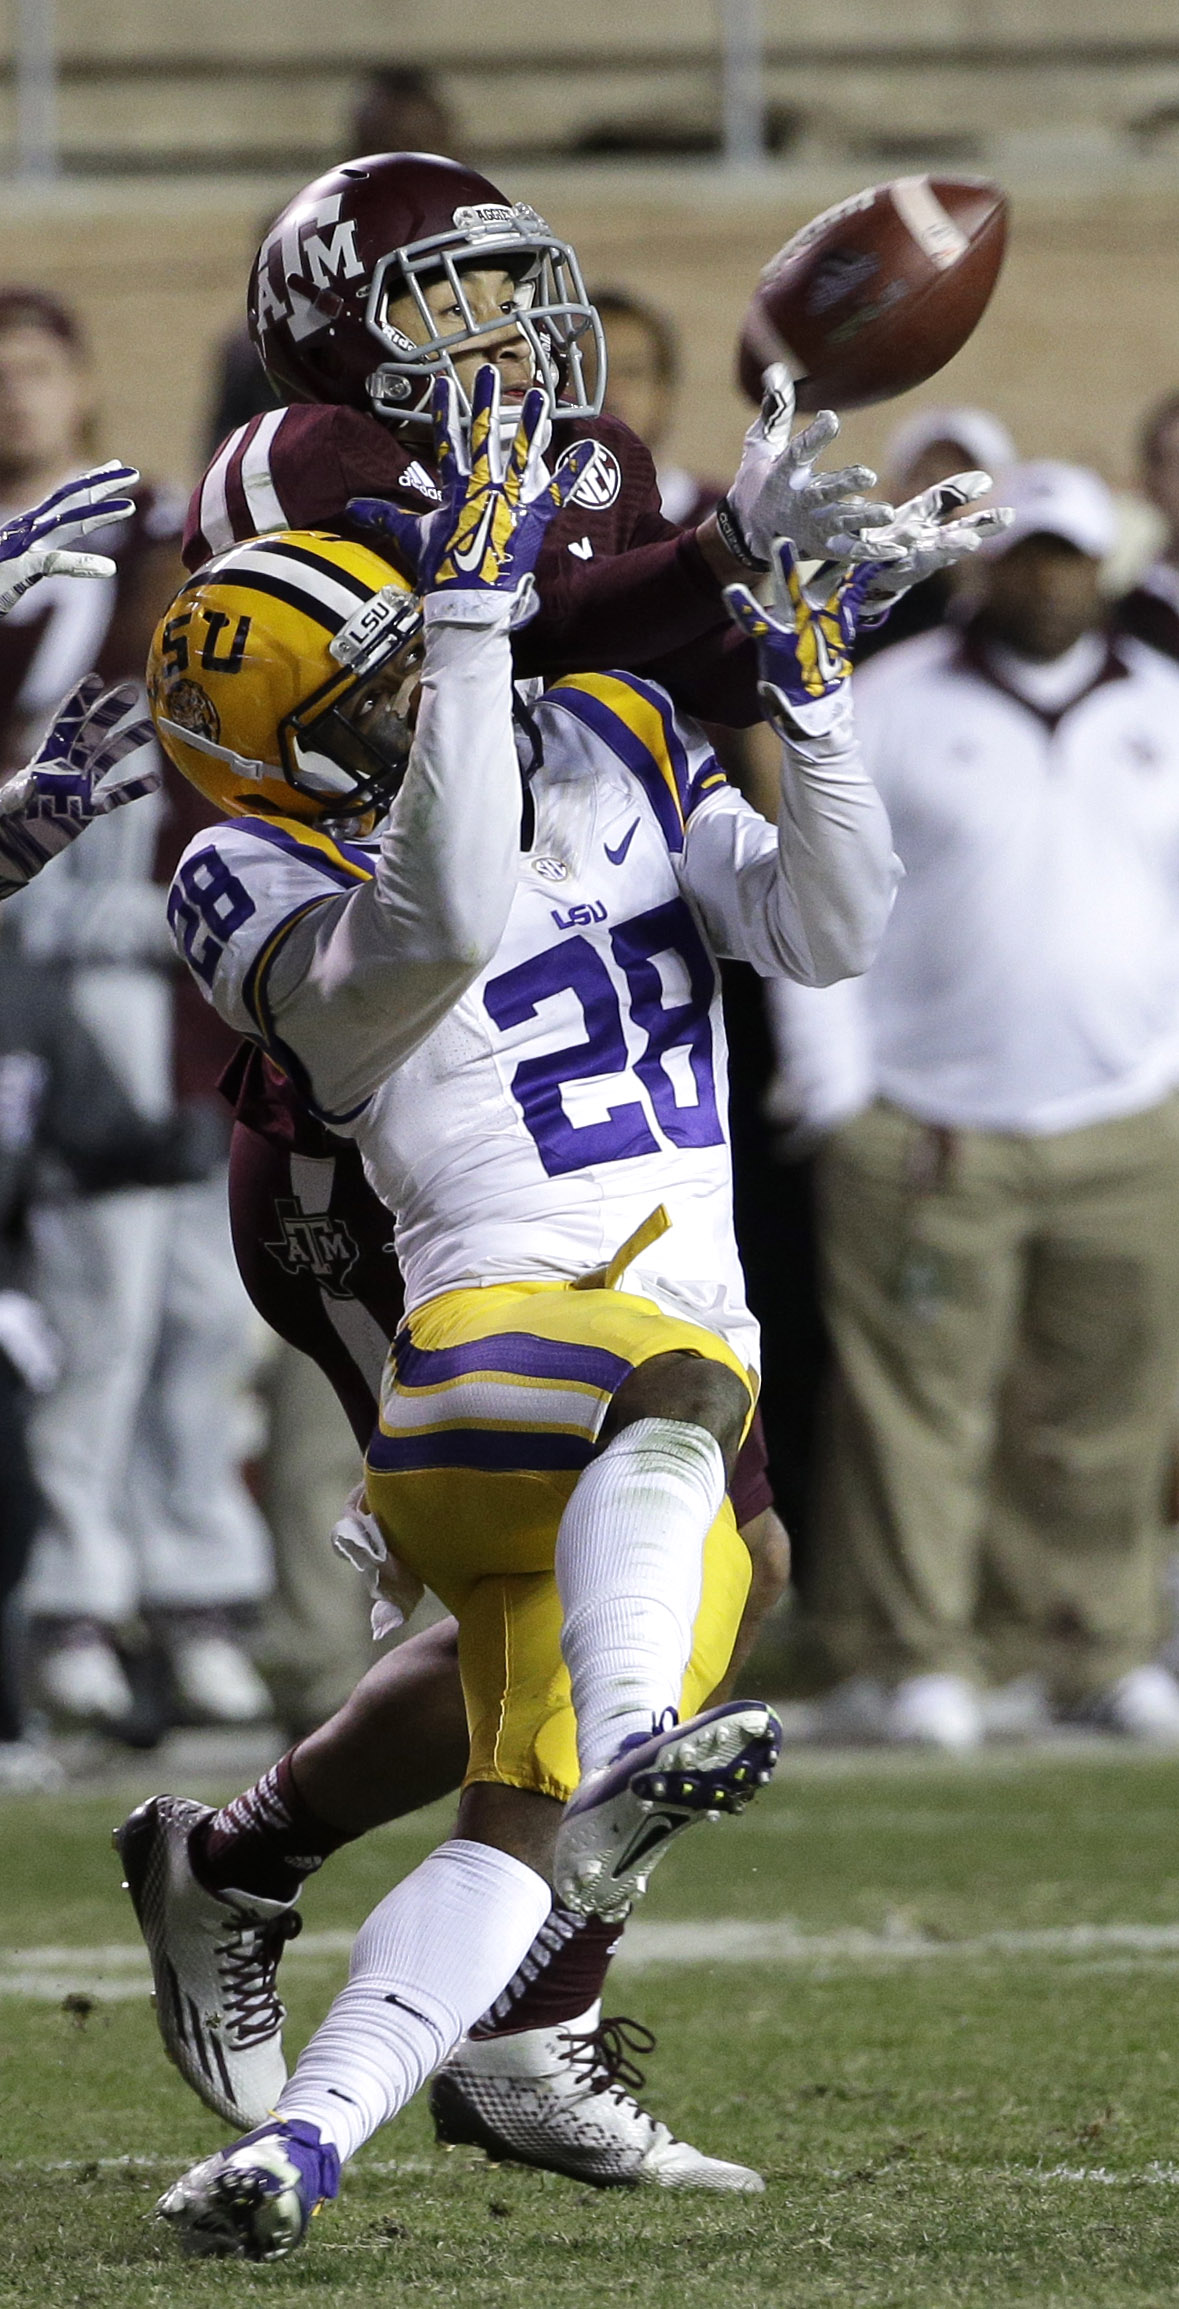 LSU safety Jalen Mills (28) breaks up a pass intended for Texas A&M wide receiver Josh Reynolds during the fourth quarter of an NCAA college football game Thursday, Nov. 27, 2014, in College Station, Texas. The pass was intercepted by LSU's Jalen Collins. LSU won 23-17. (AP Photo/David J. Phillip)